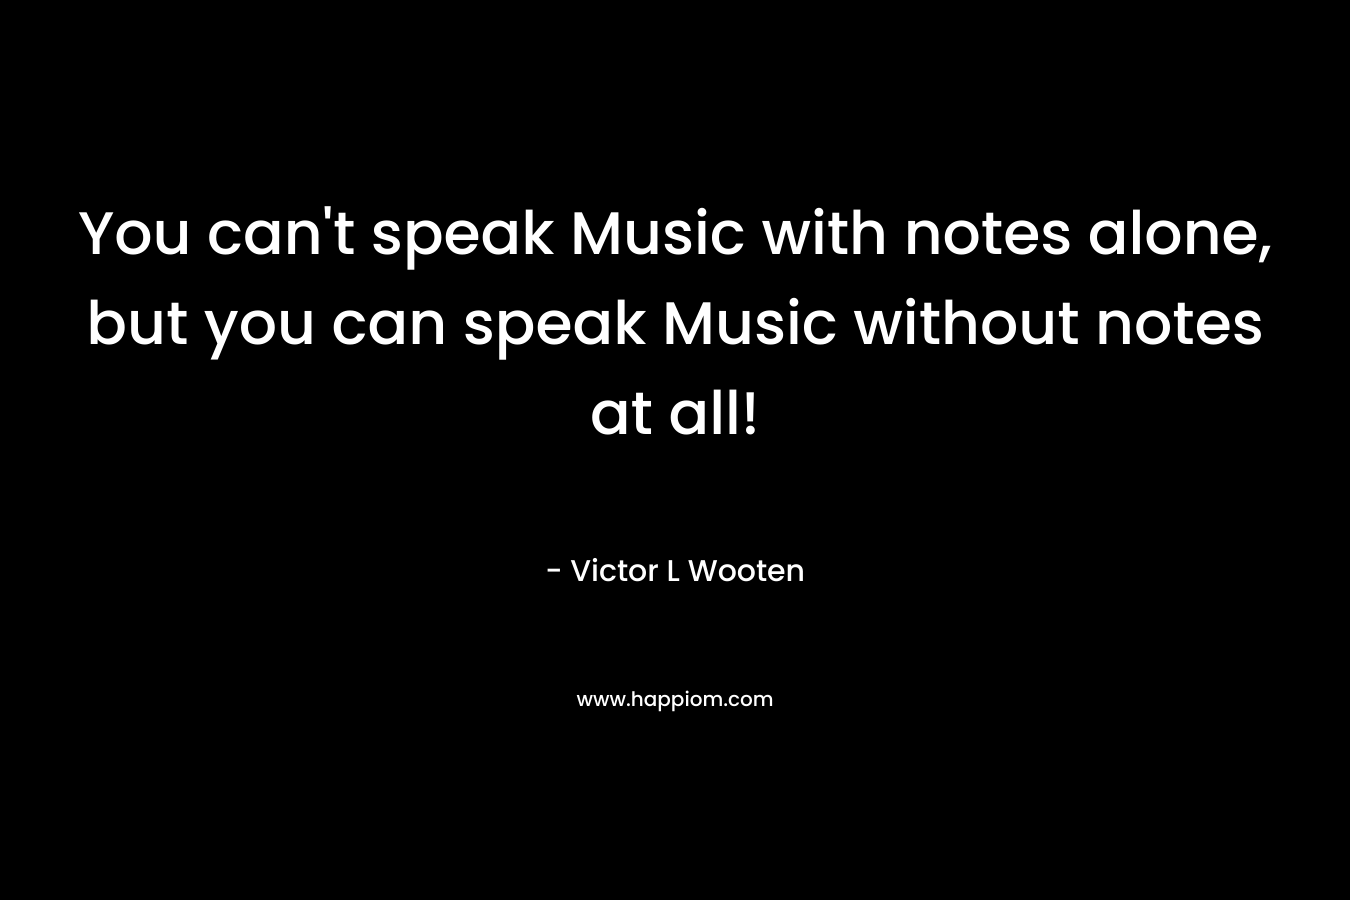 You can't speak Music with notes alone, but you can speak Music without notes at all!